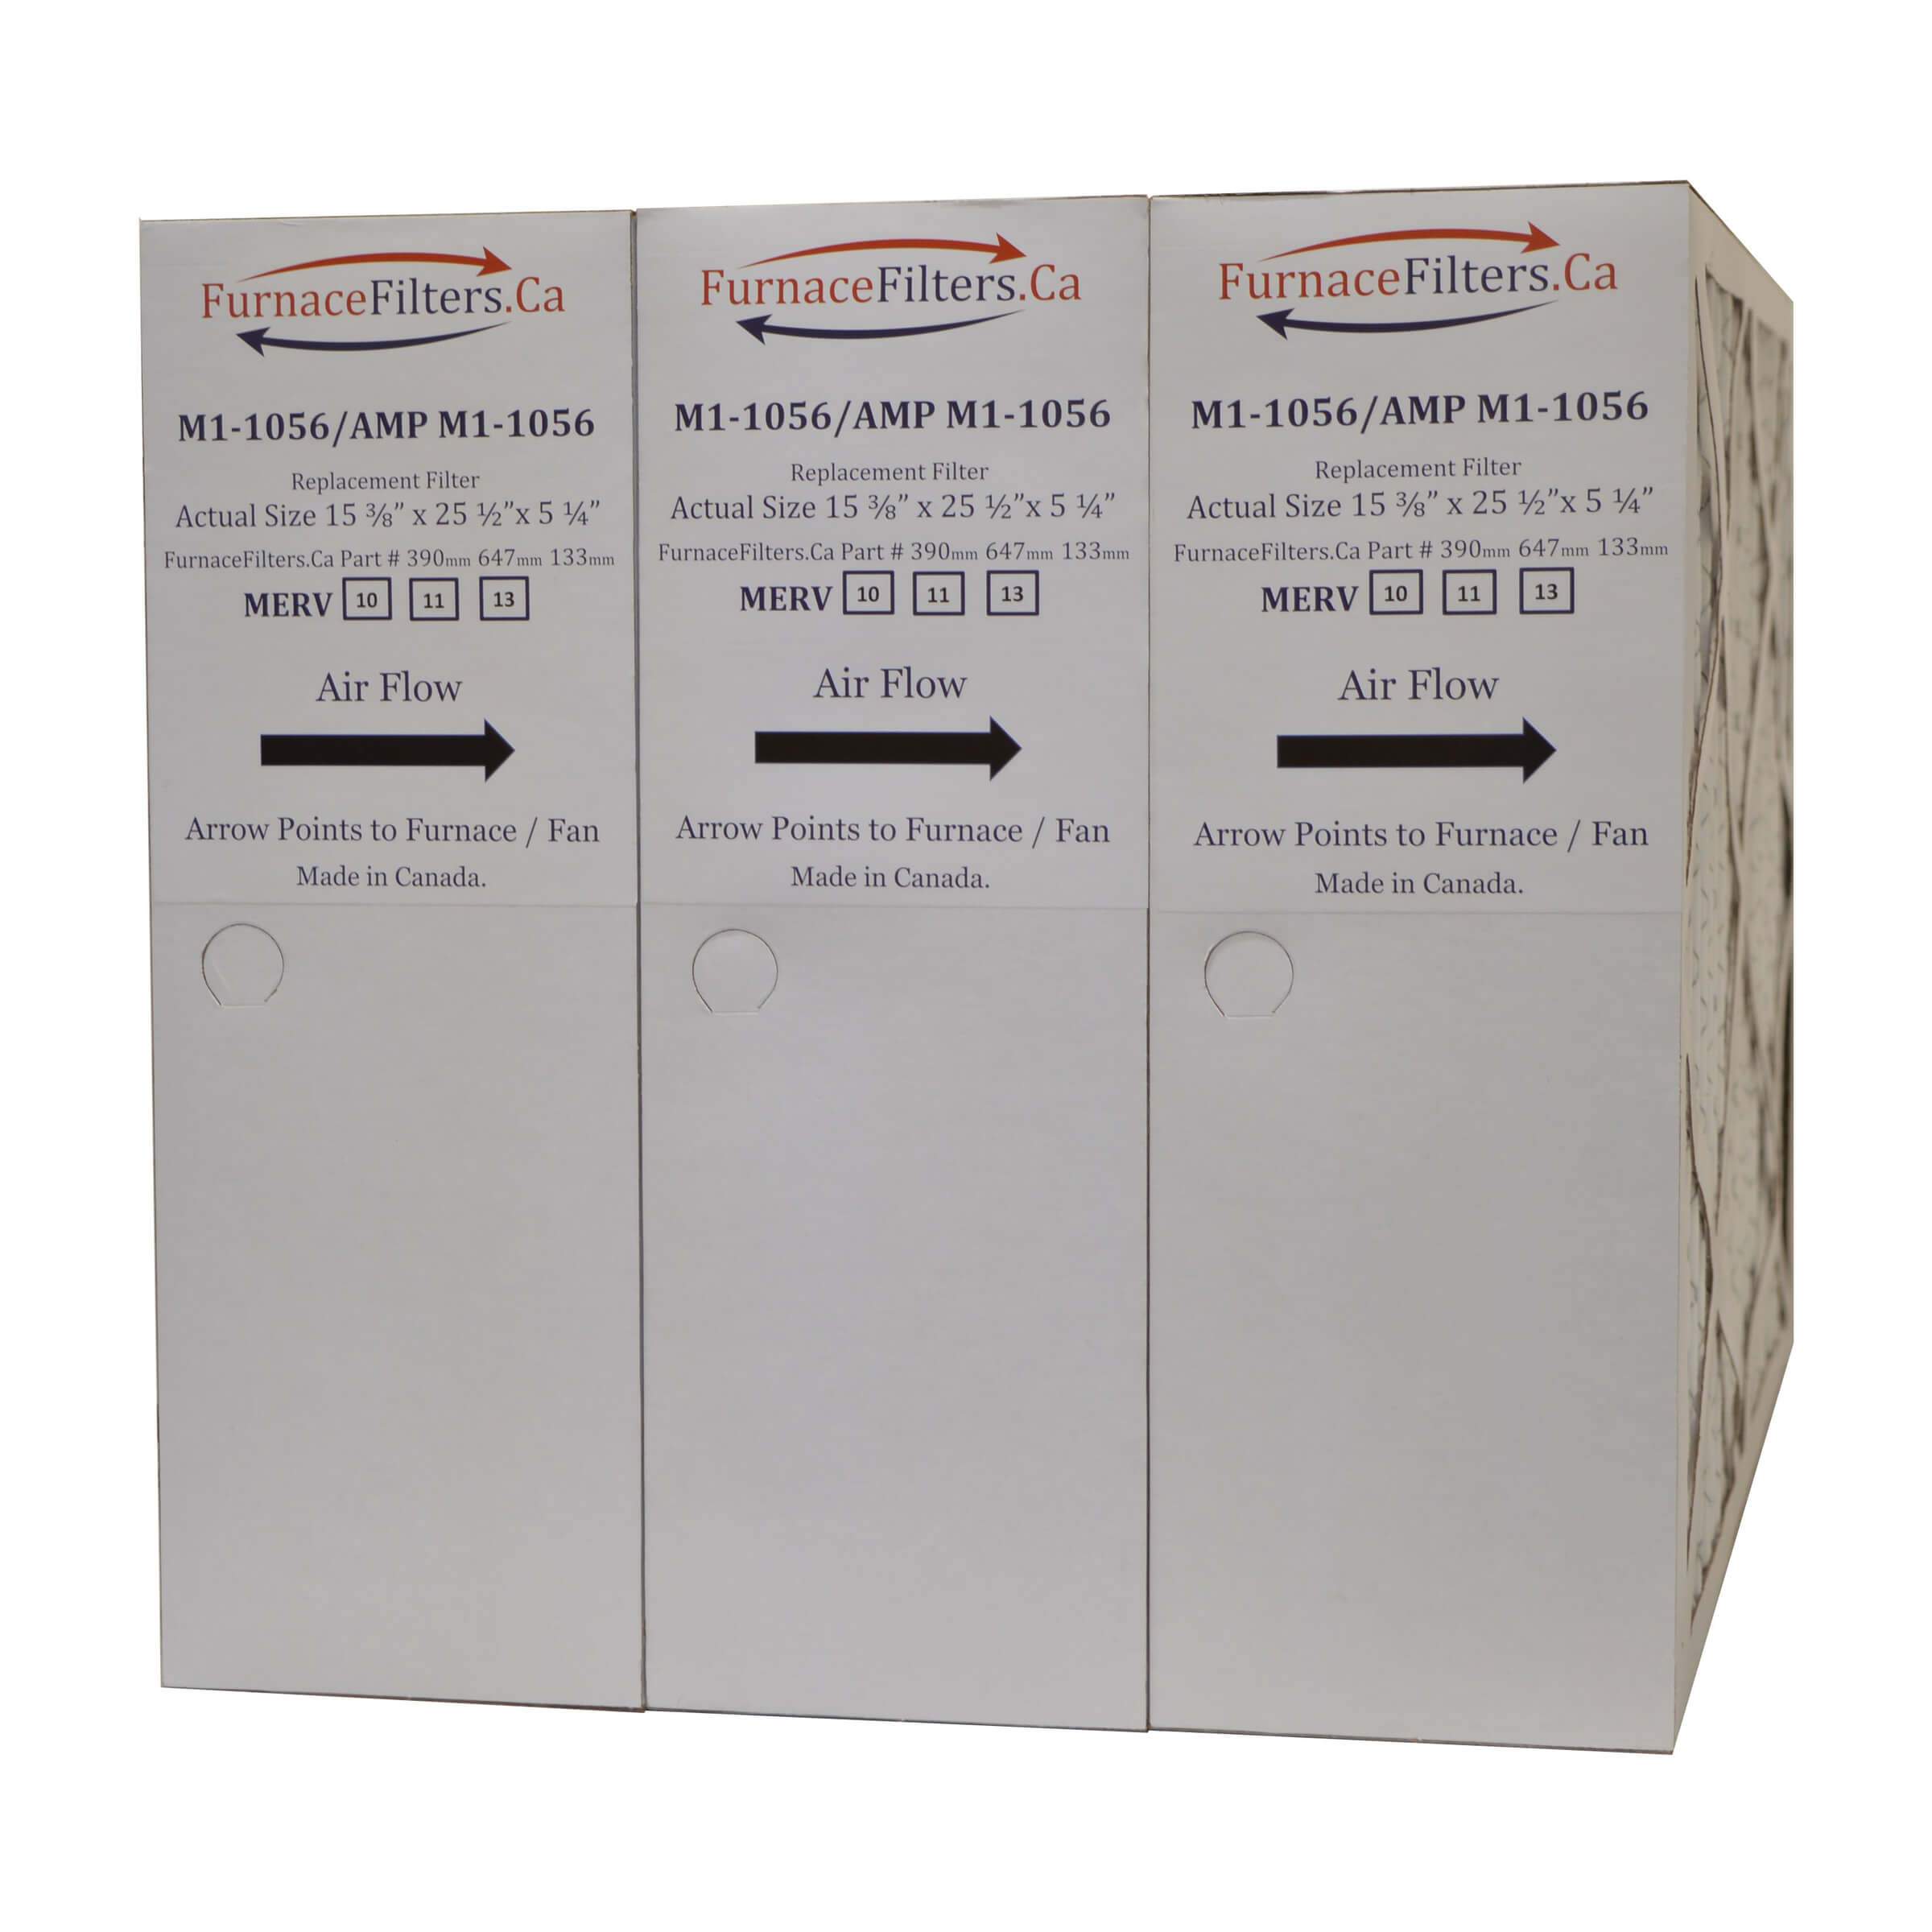 M1-1056 MERV 11 Furnace Filter for Model CMF1625, 15 3/8 x 25 1/2 x 5 1/4, Case of 3 by FurnaceFilters.Ca